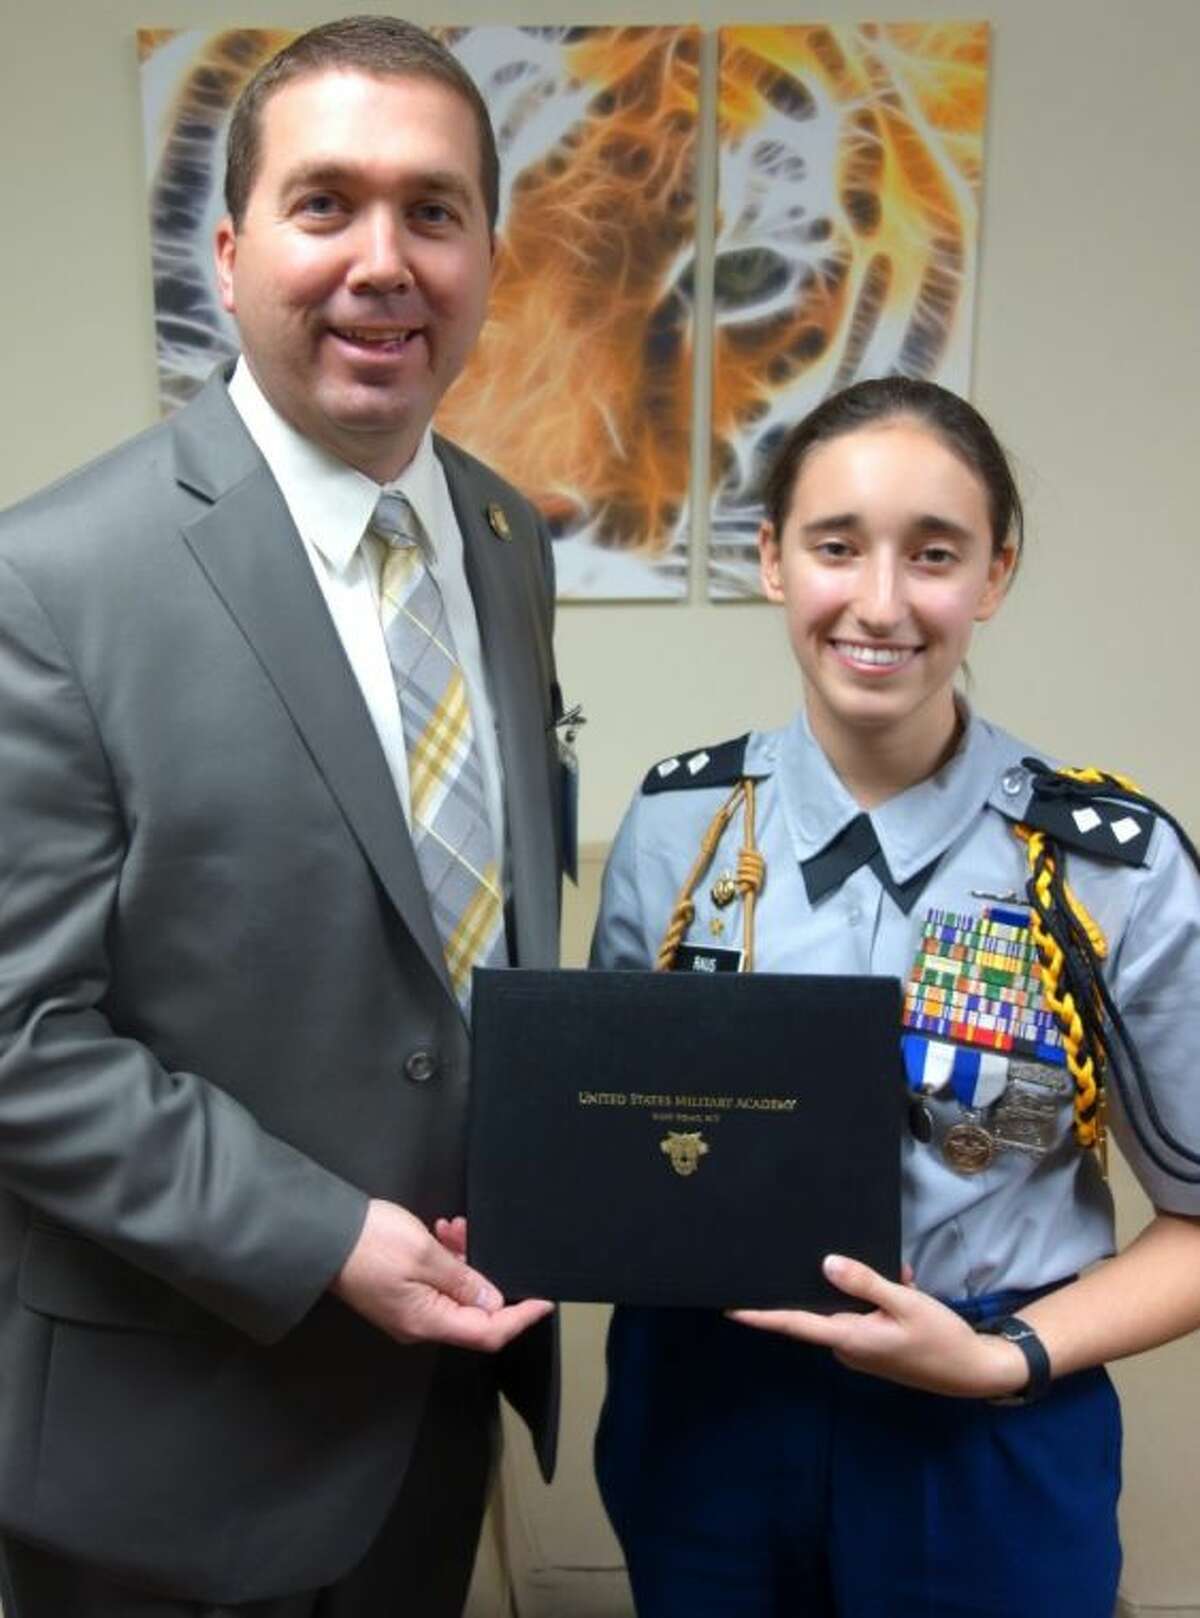 Conroe High School Principal Dr. Mark Weatherly congratulates senior Tala Raus on her acceptance into West Point Academy.